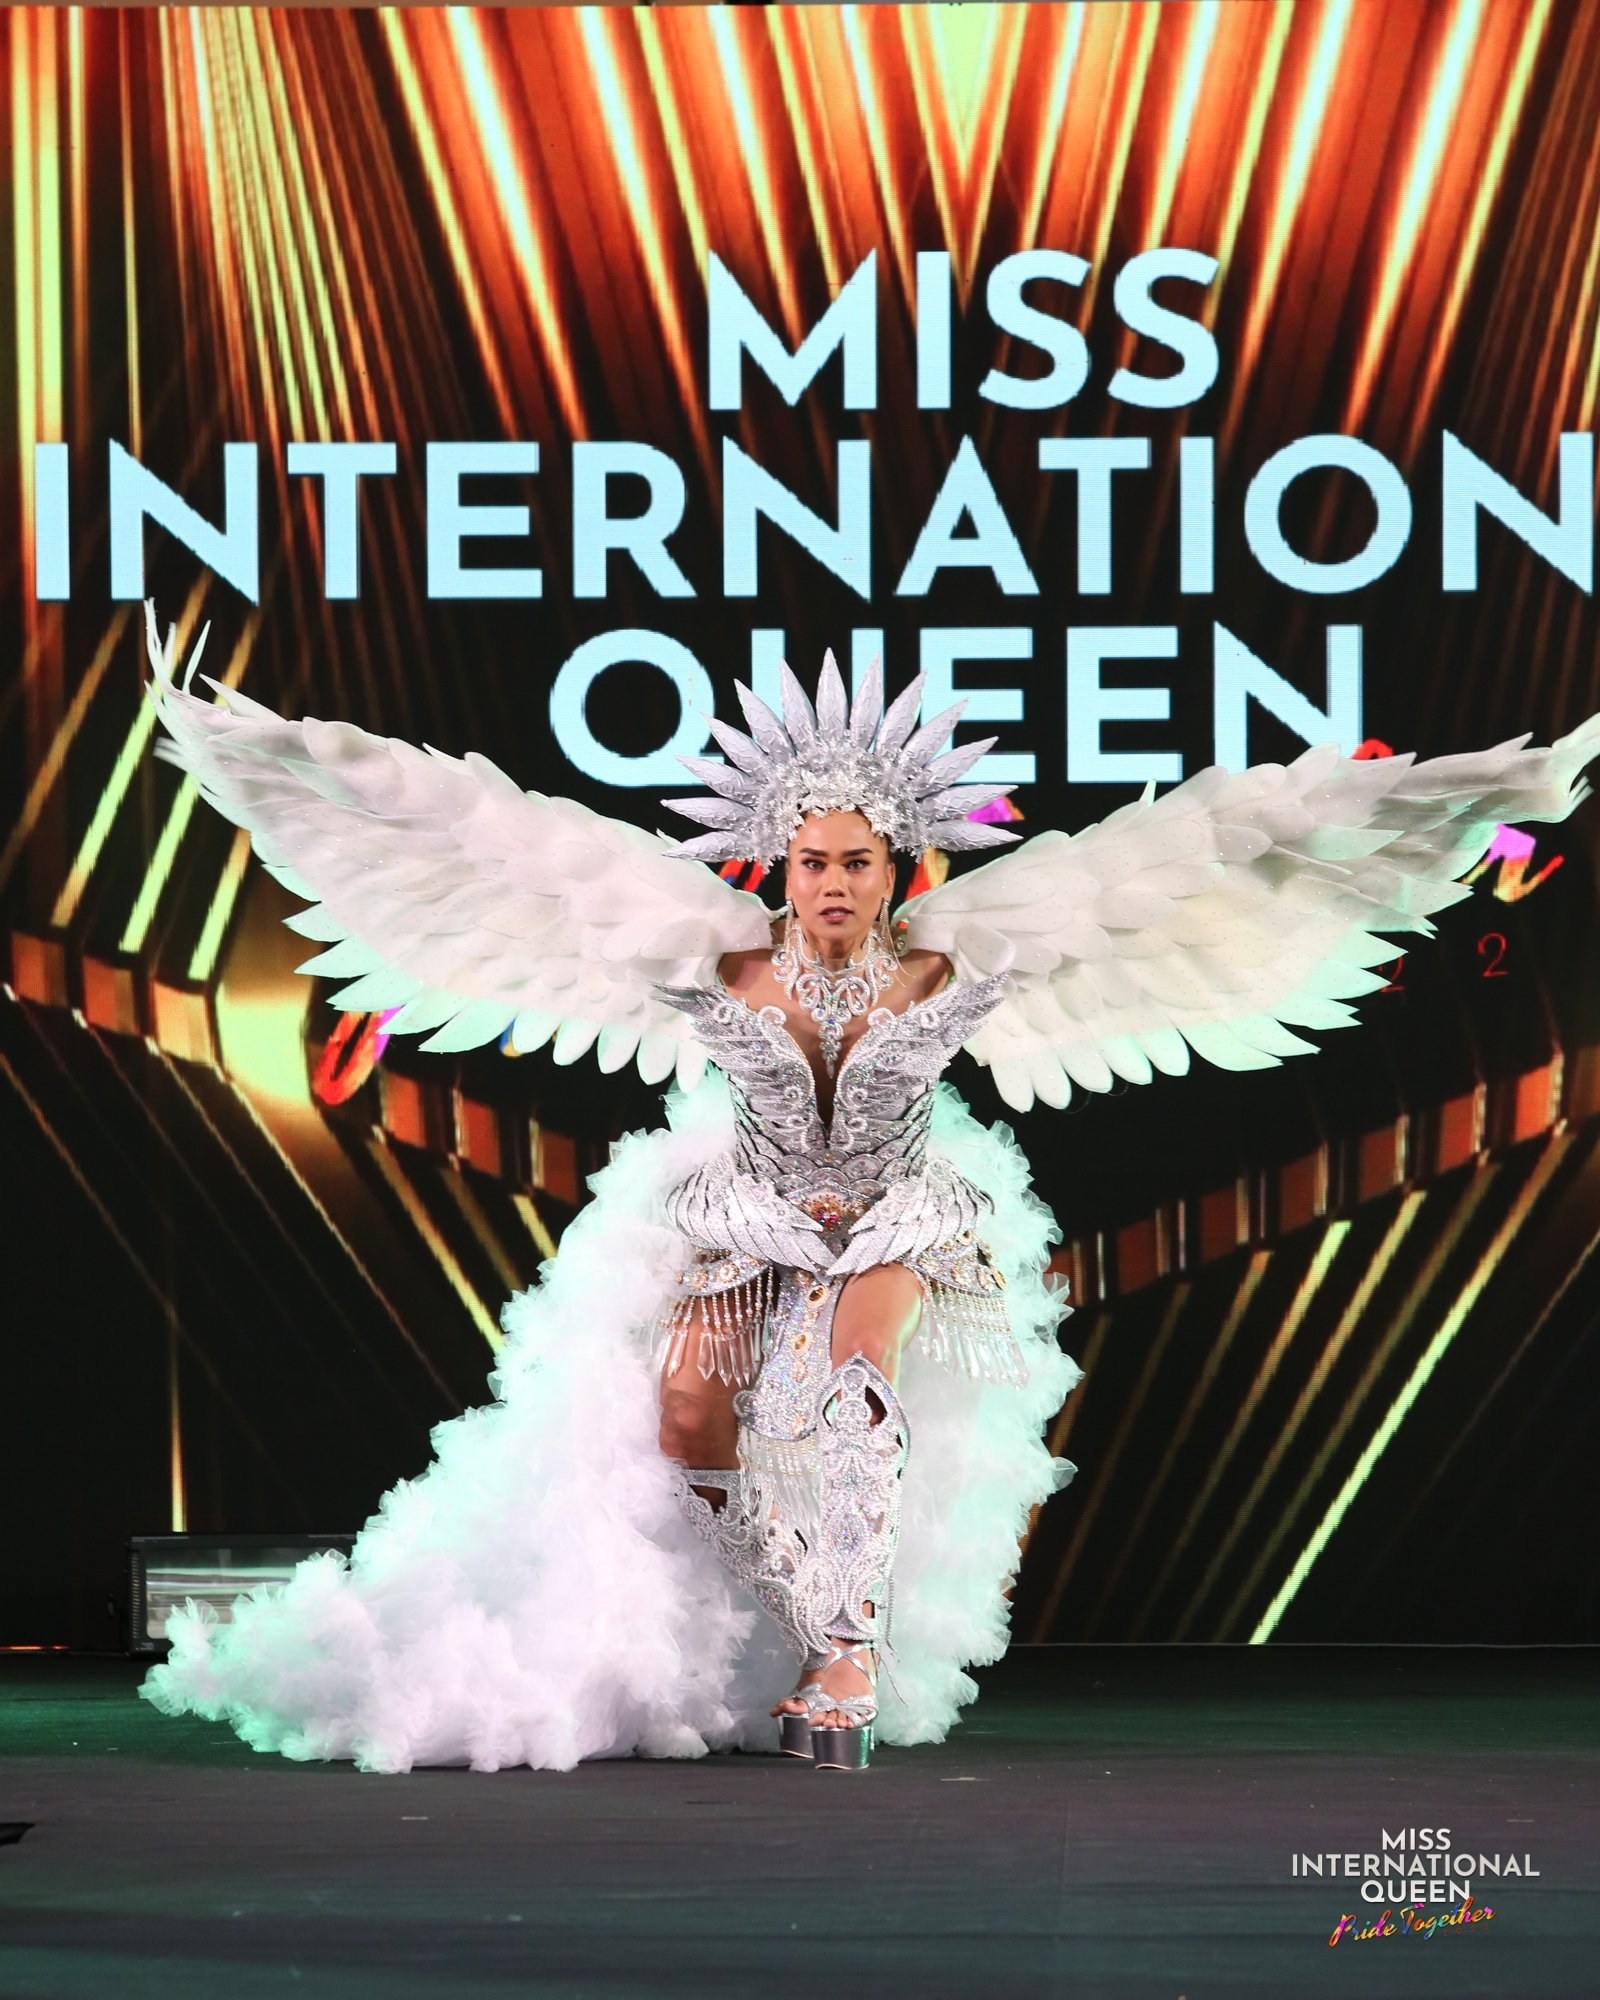 Miss Canada in the snow owl outfit raises her arms in a flying stance